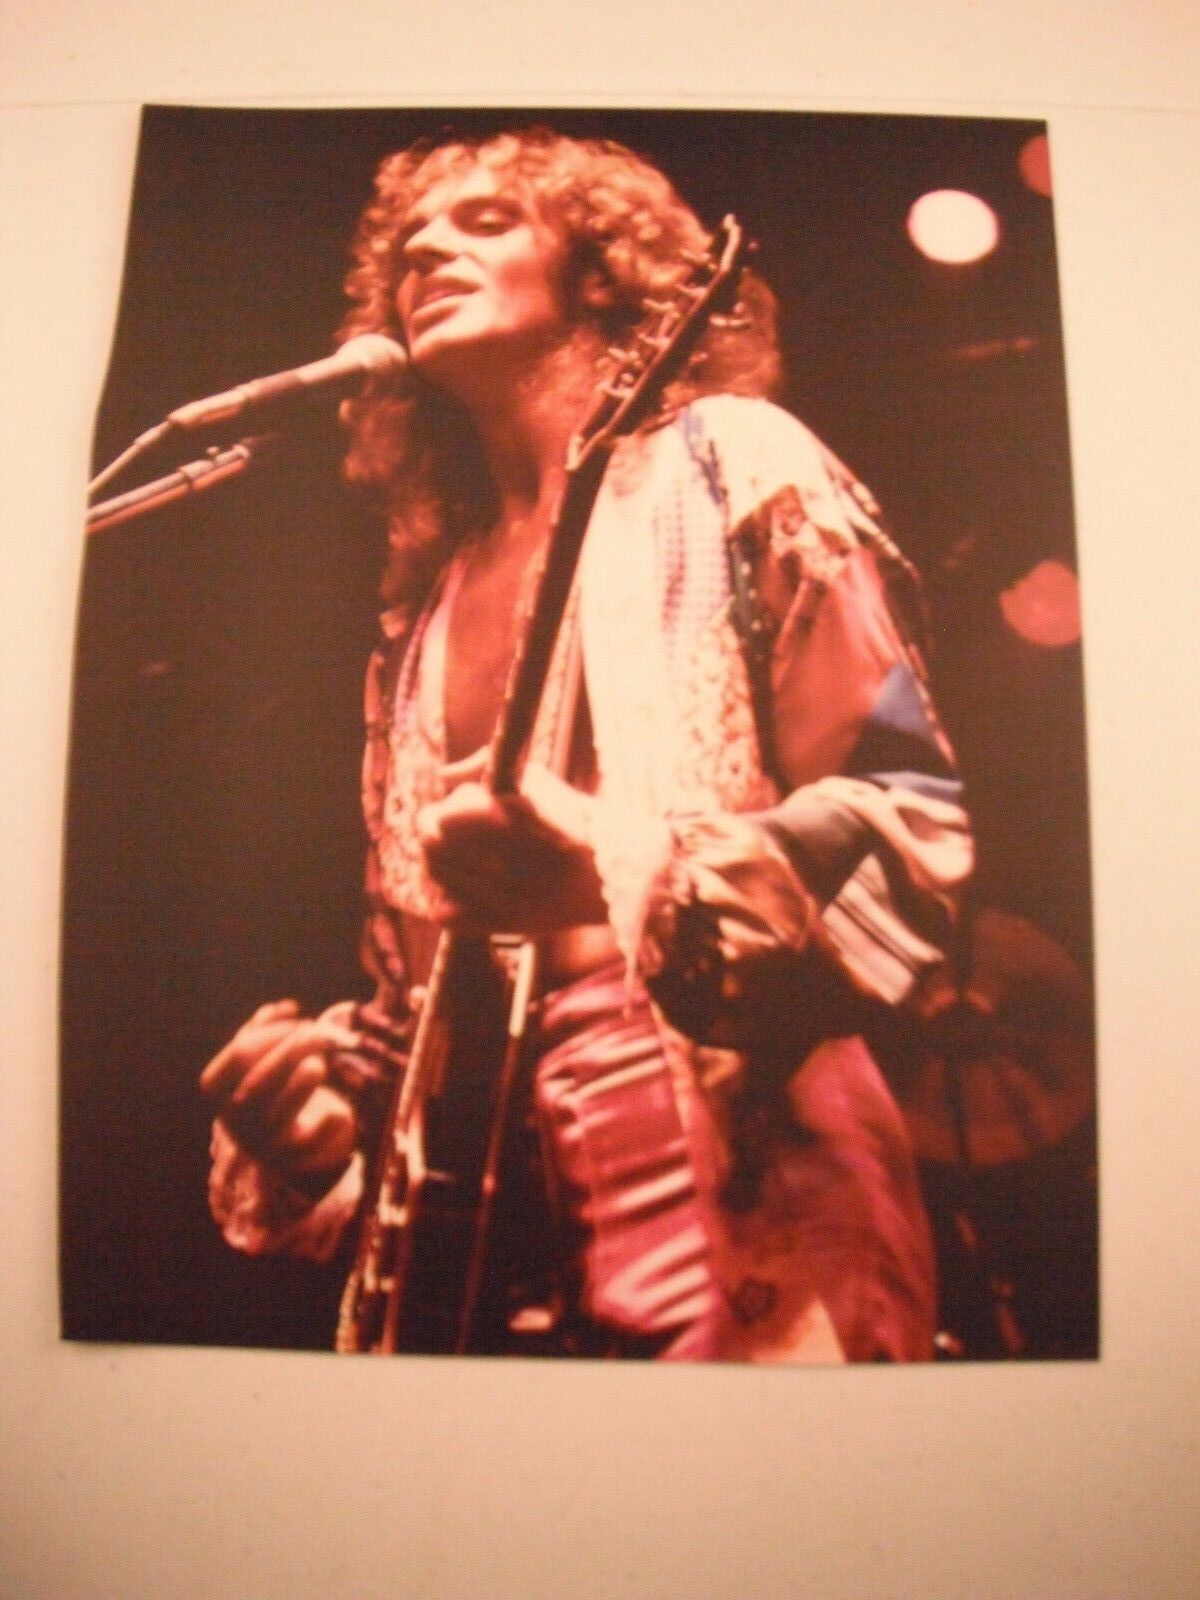 Peter Frampton Guitarist 12x9 Coffee Table Book Photo Poster painting Page